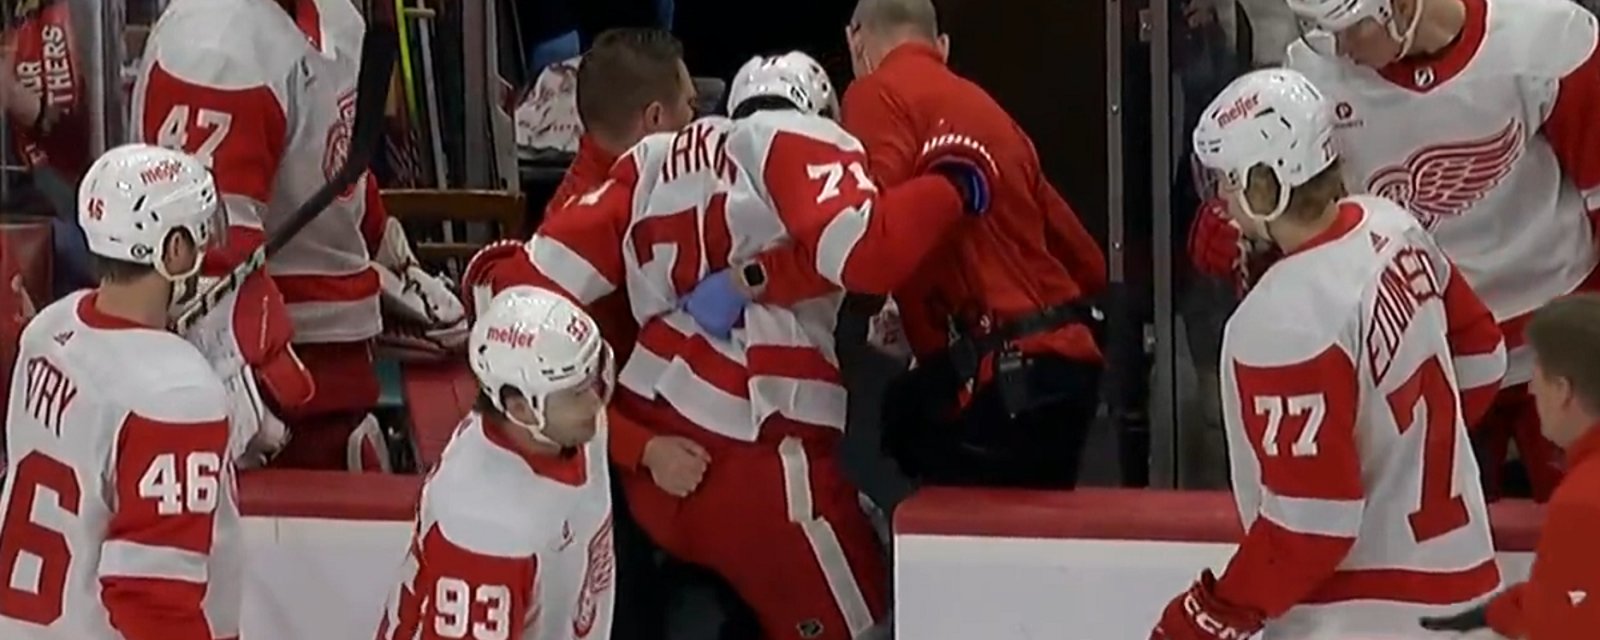 Dylan Larkin injured 28 seconds into today's game.